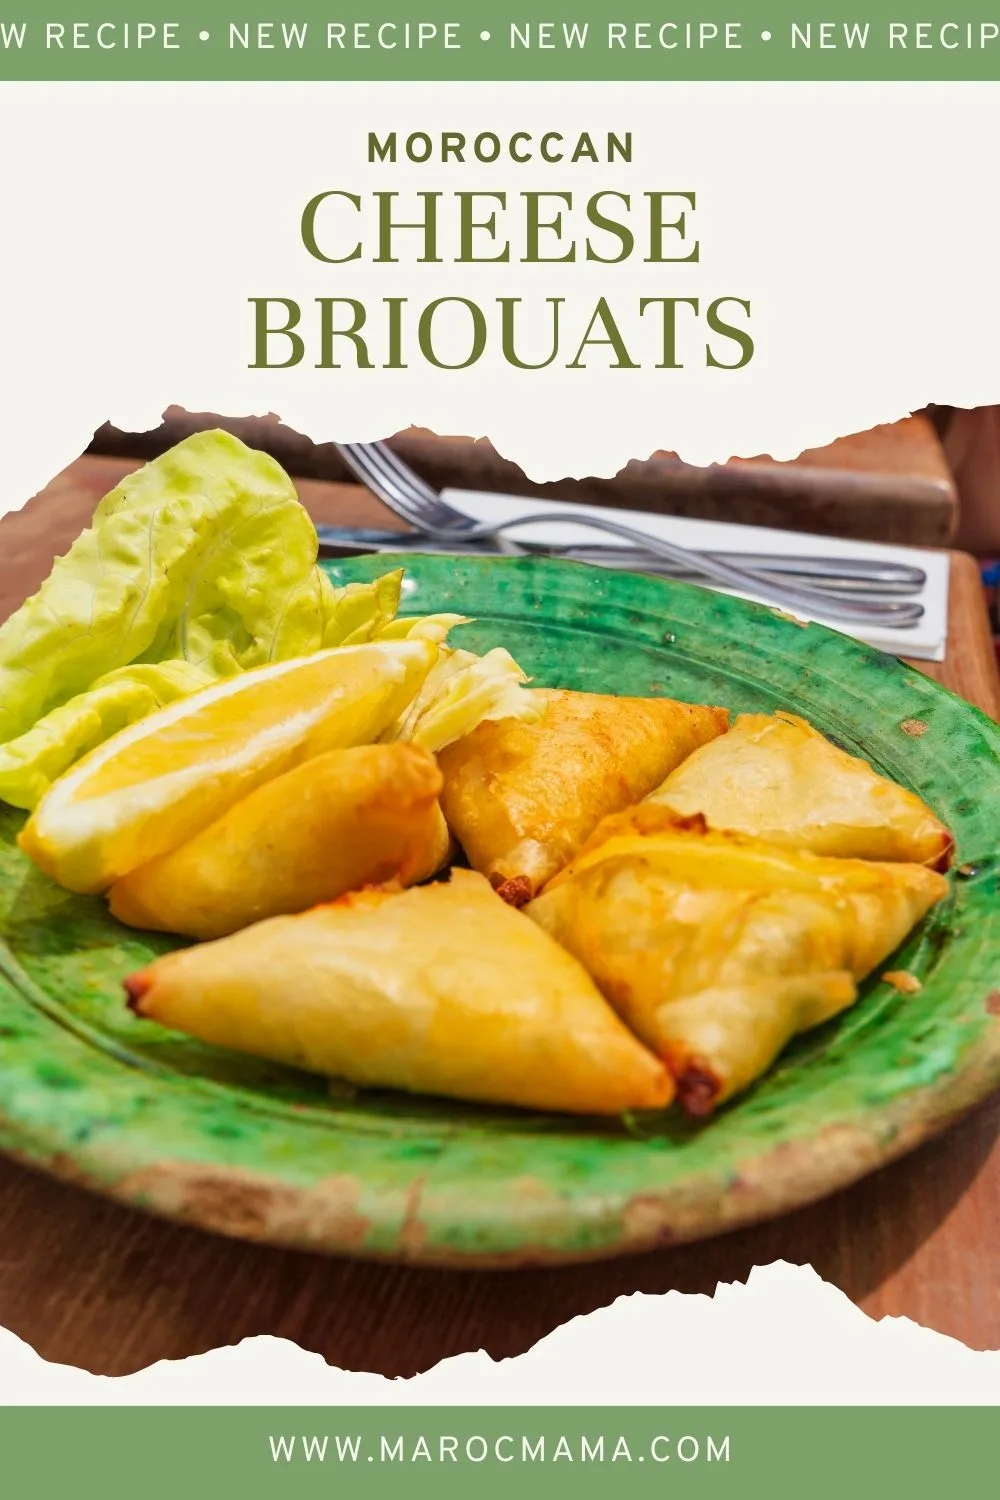 Moroccan cheese briouats served in a plate with the text new recipe Moroccan Cheese Briouats